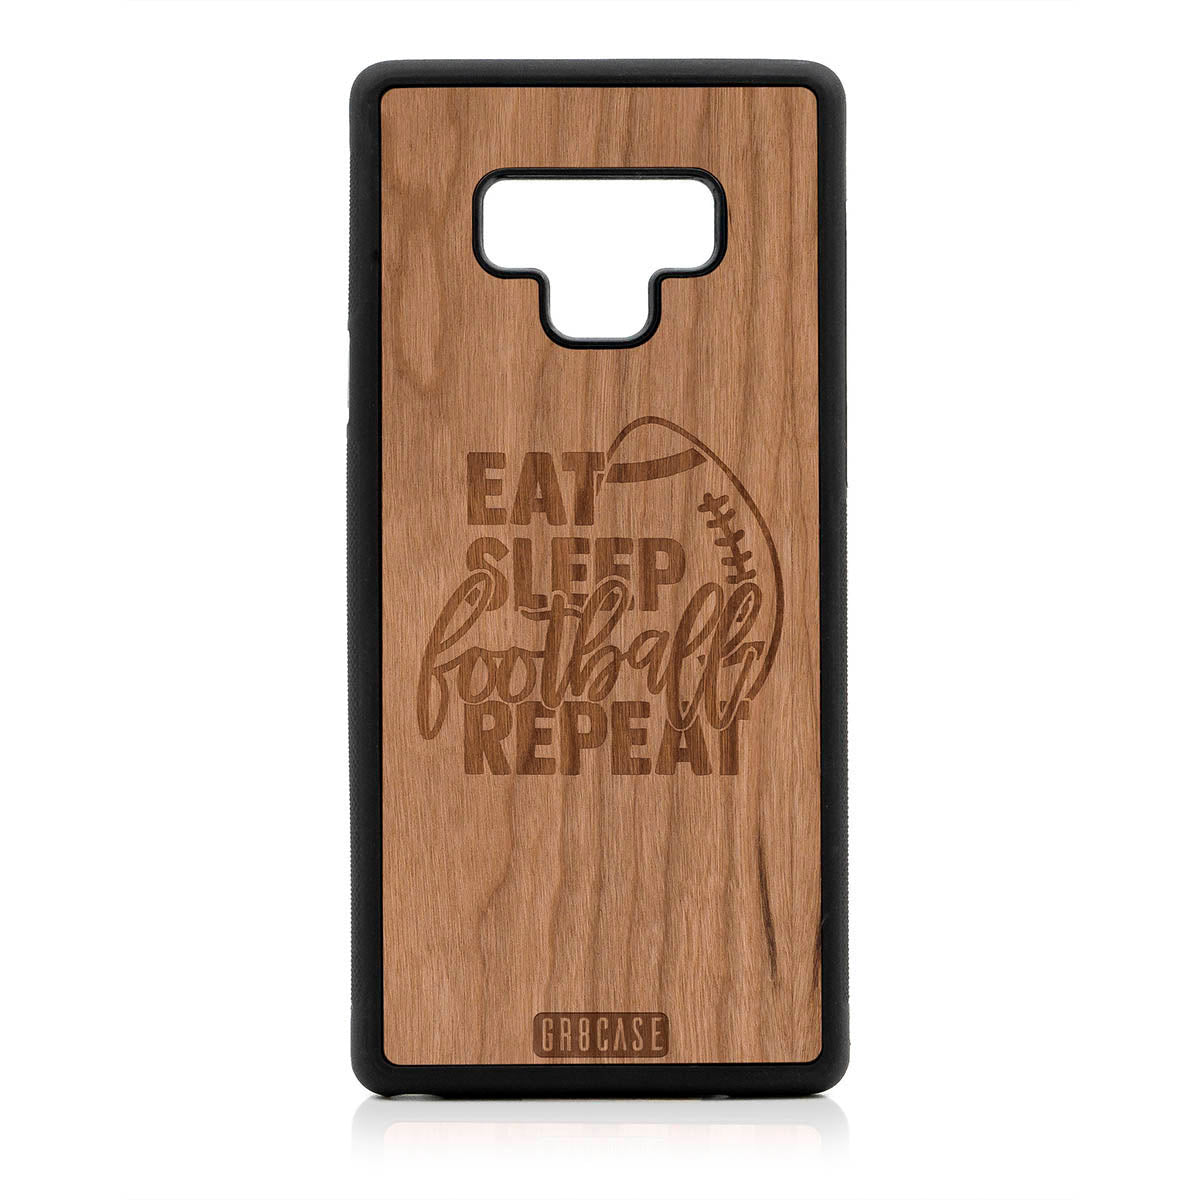 Eat Sleep Football Repeat Design Wood Case For Samsung Galaxy Note 9